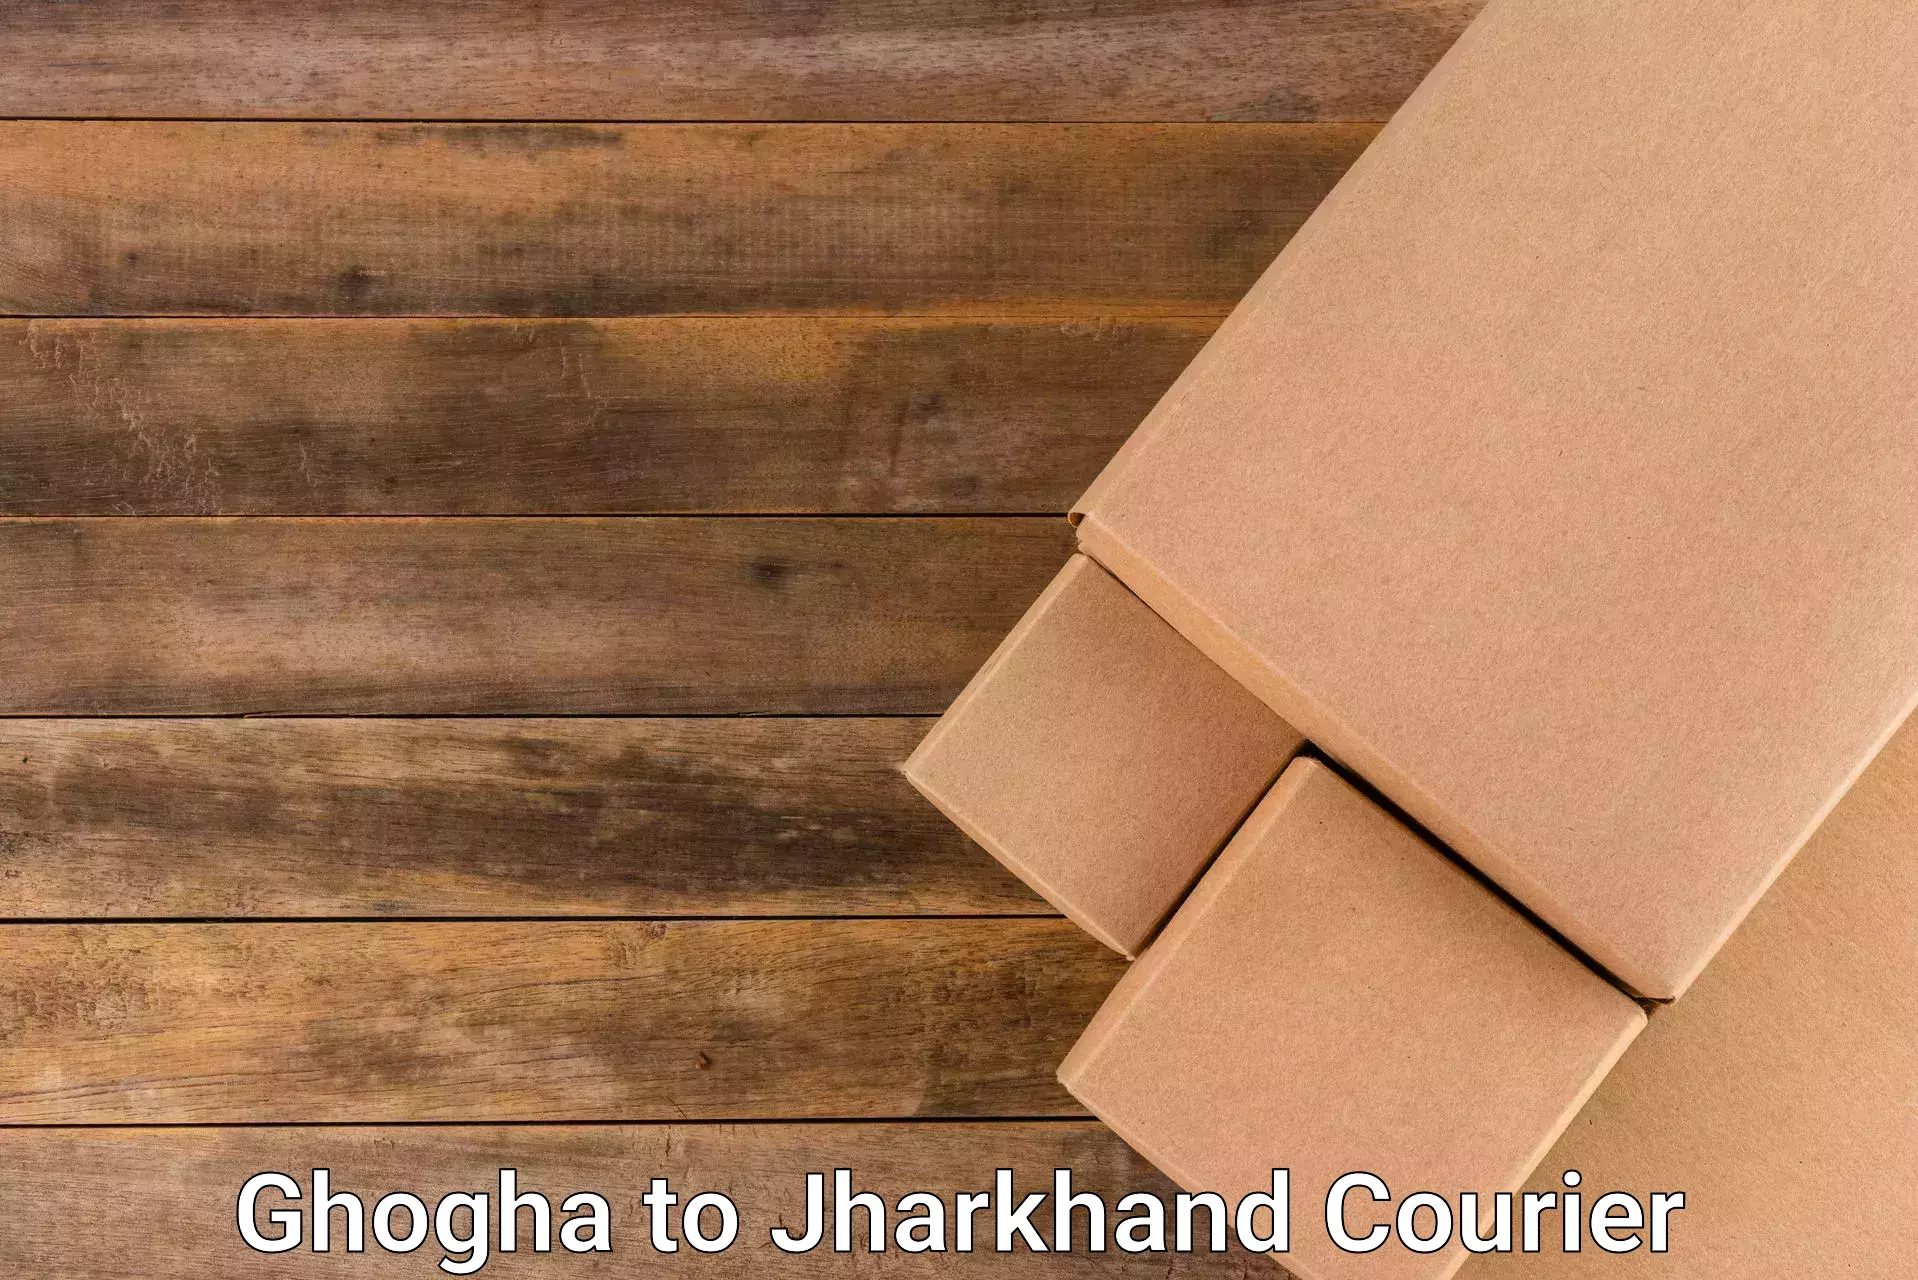 Same-day delivery solutions Ghogha to Jamshedpur